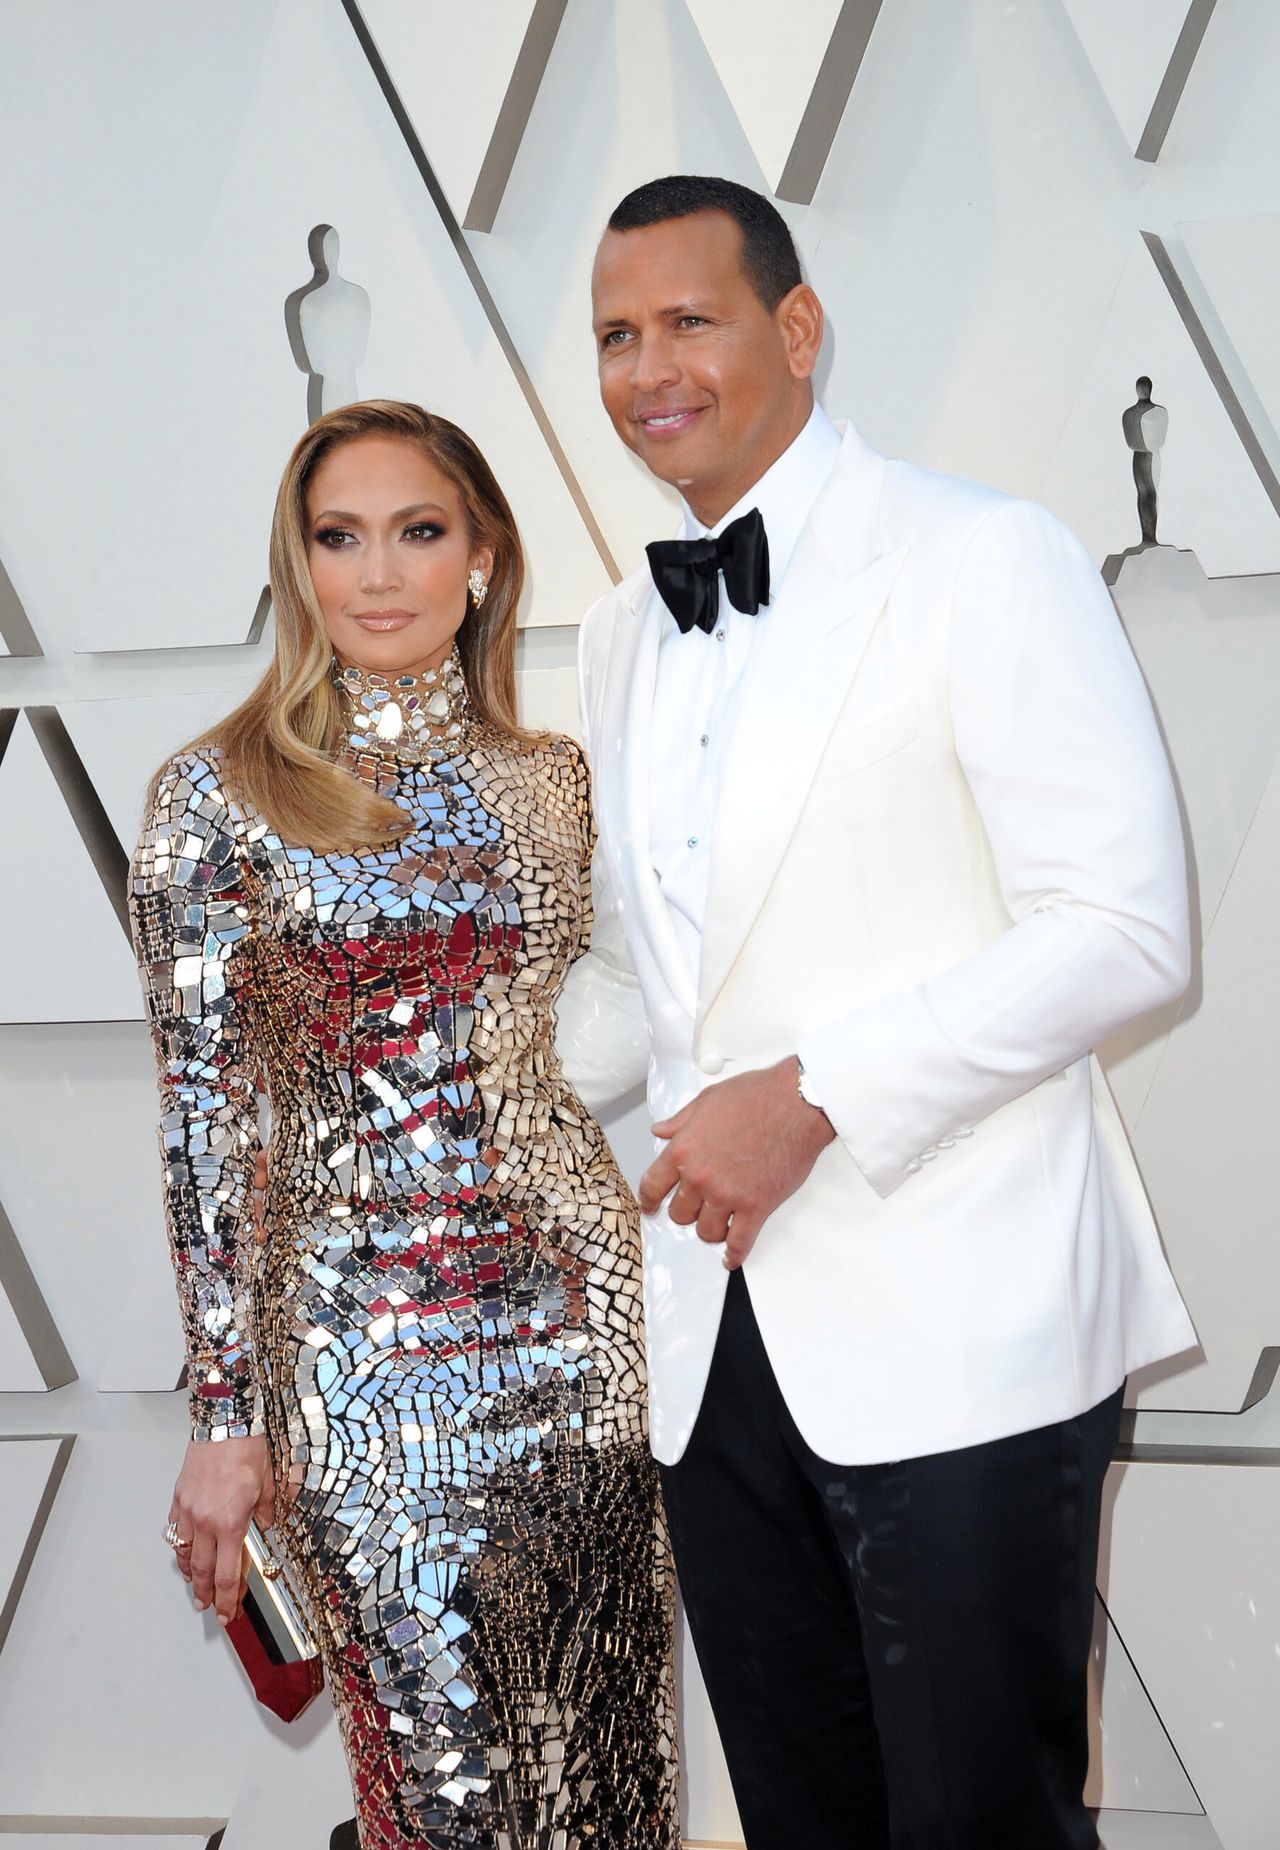 Jennifer Lopez and Alex Rodriguez at the 91st Annual Academy Awards held at the Hollywood and Highland in Los Angeles, USA on February 24, 2019.